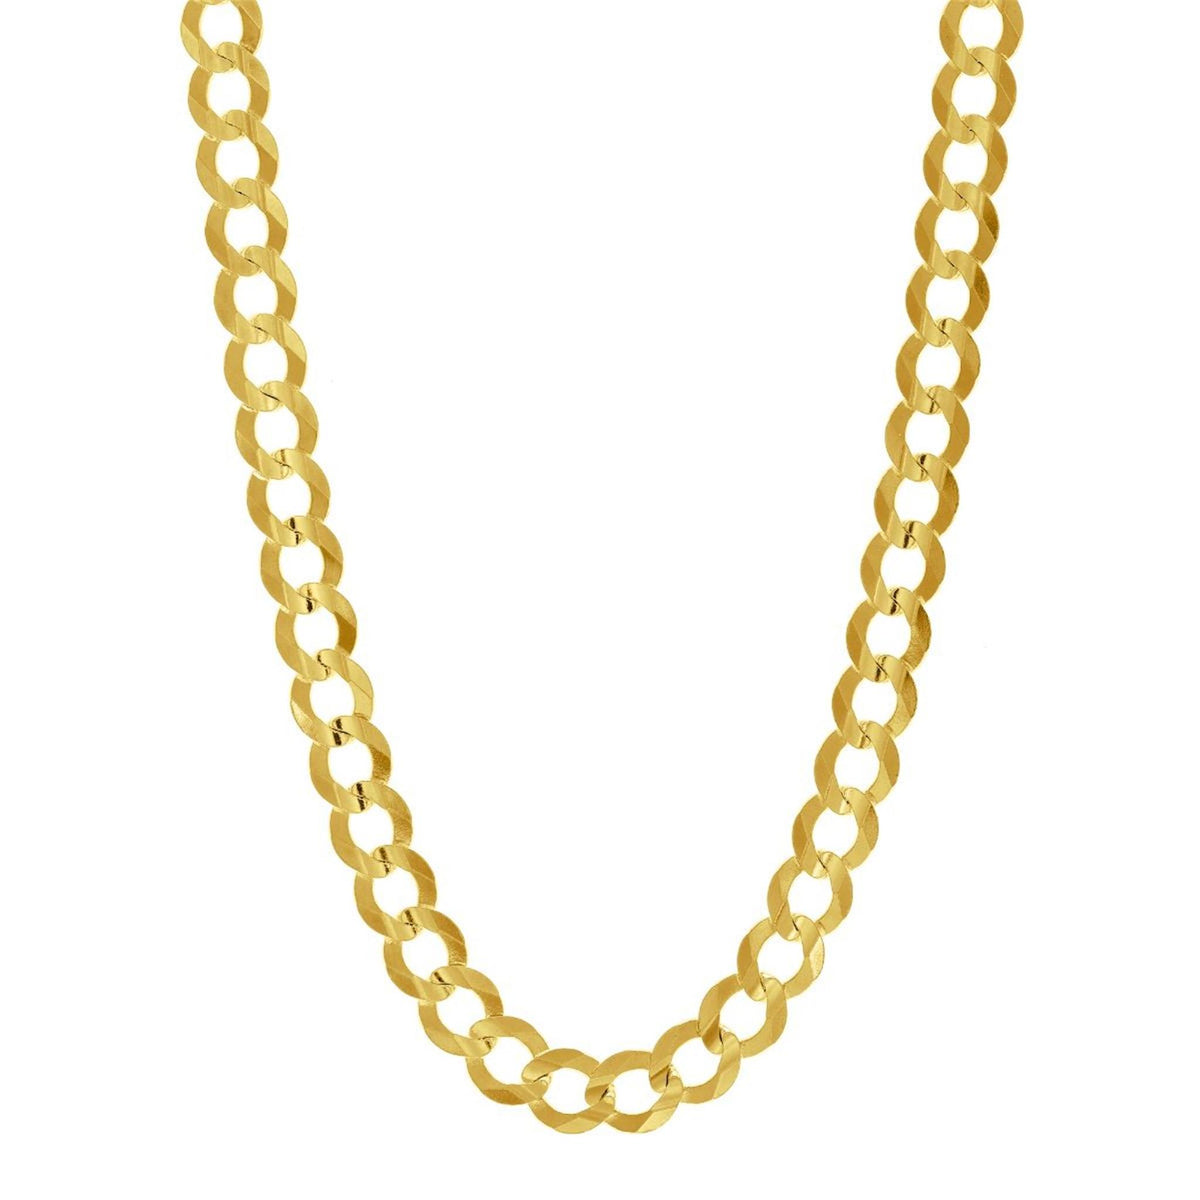 20" 14K Yellow Gold 6mm Curb Link Chain